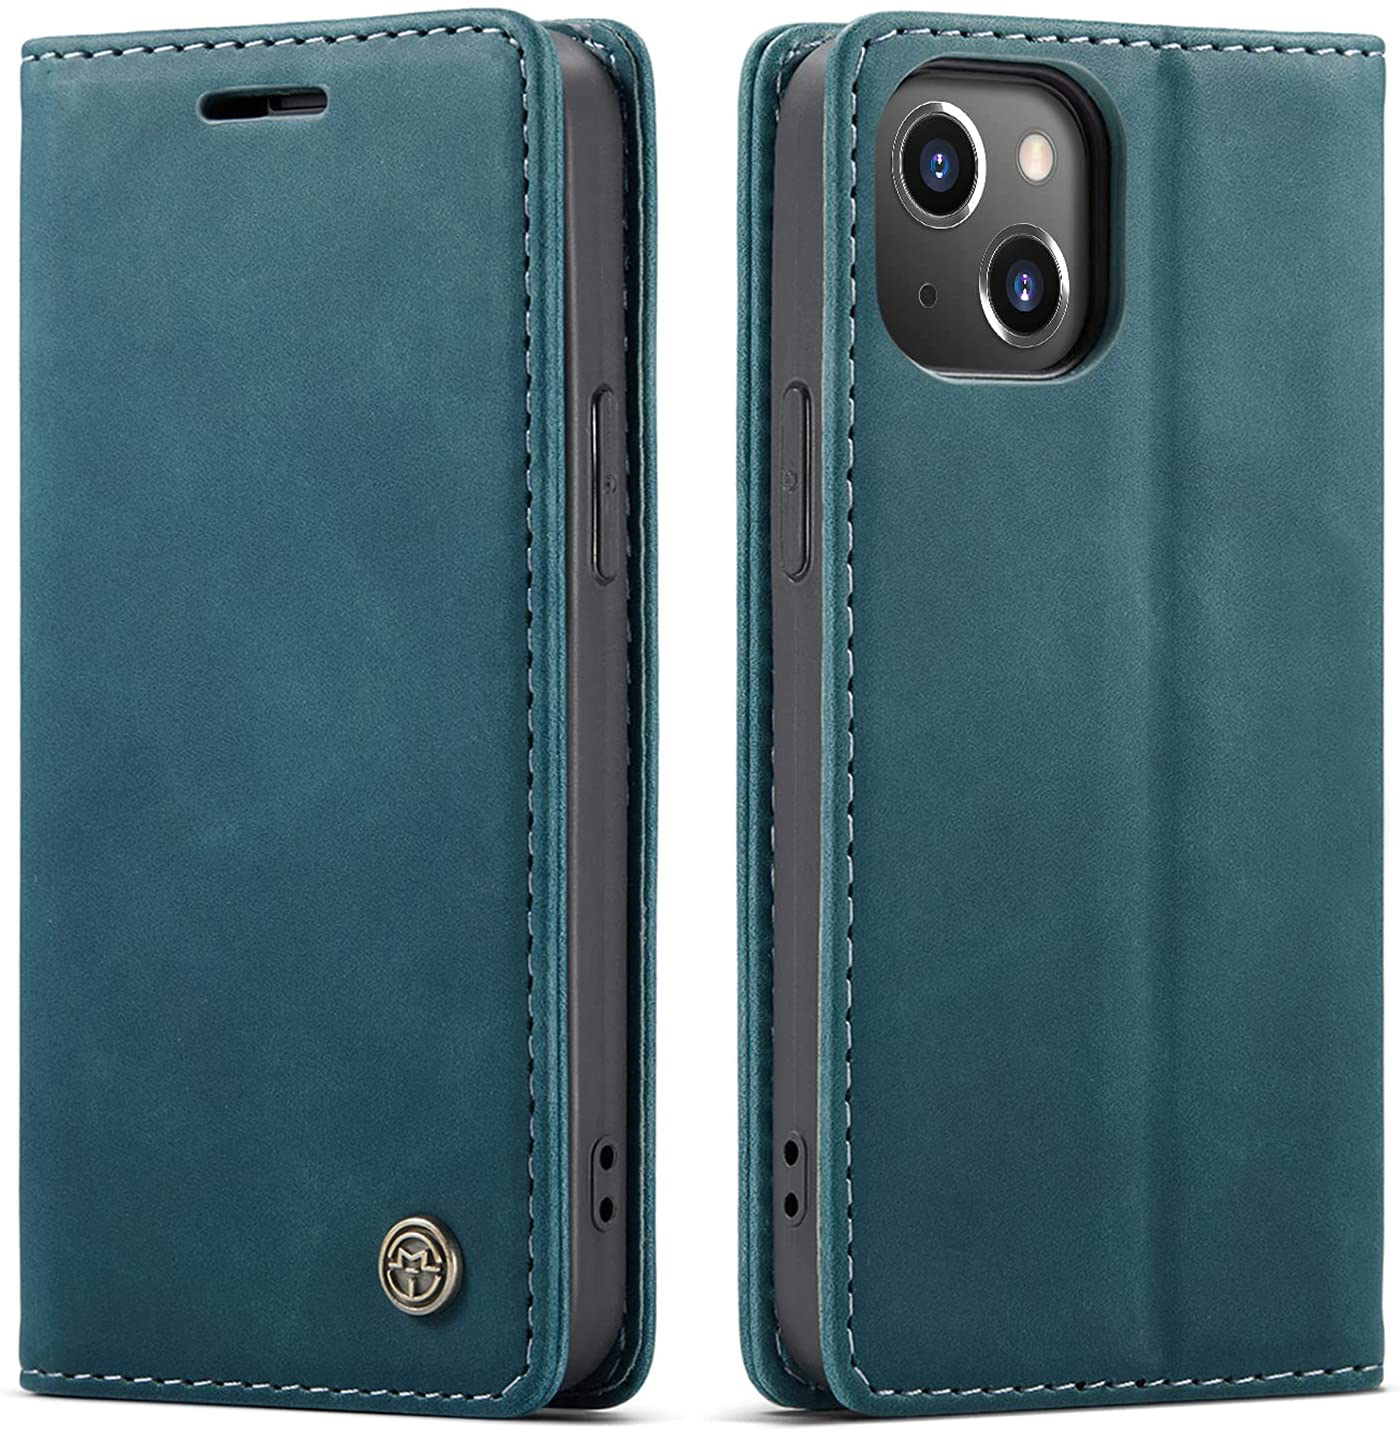 iPhone 13 blue color leather wallet flip cover case By excelsior